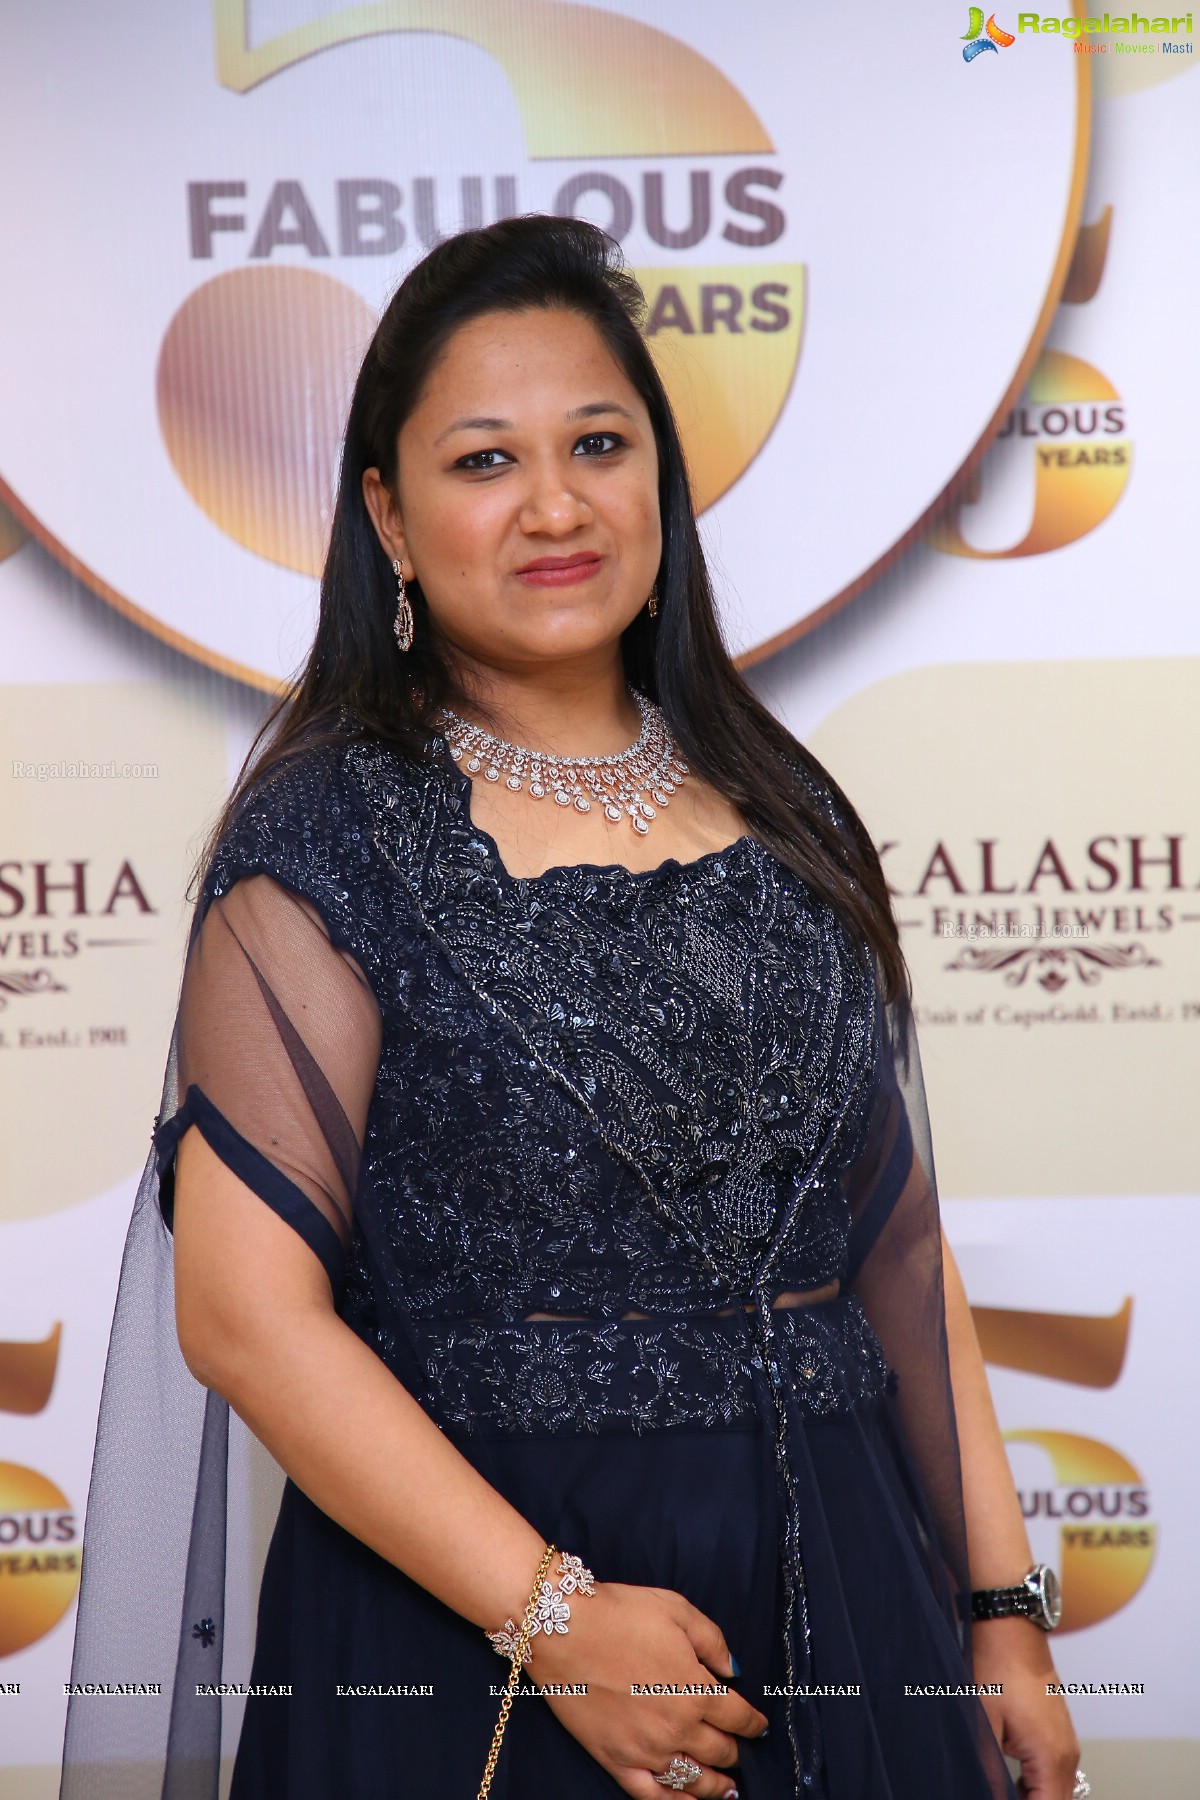 Kalasha Jewels Anniversary Special Jewellery Collection Showcase 2022